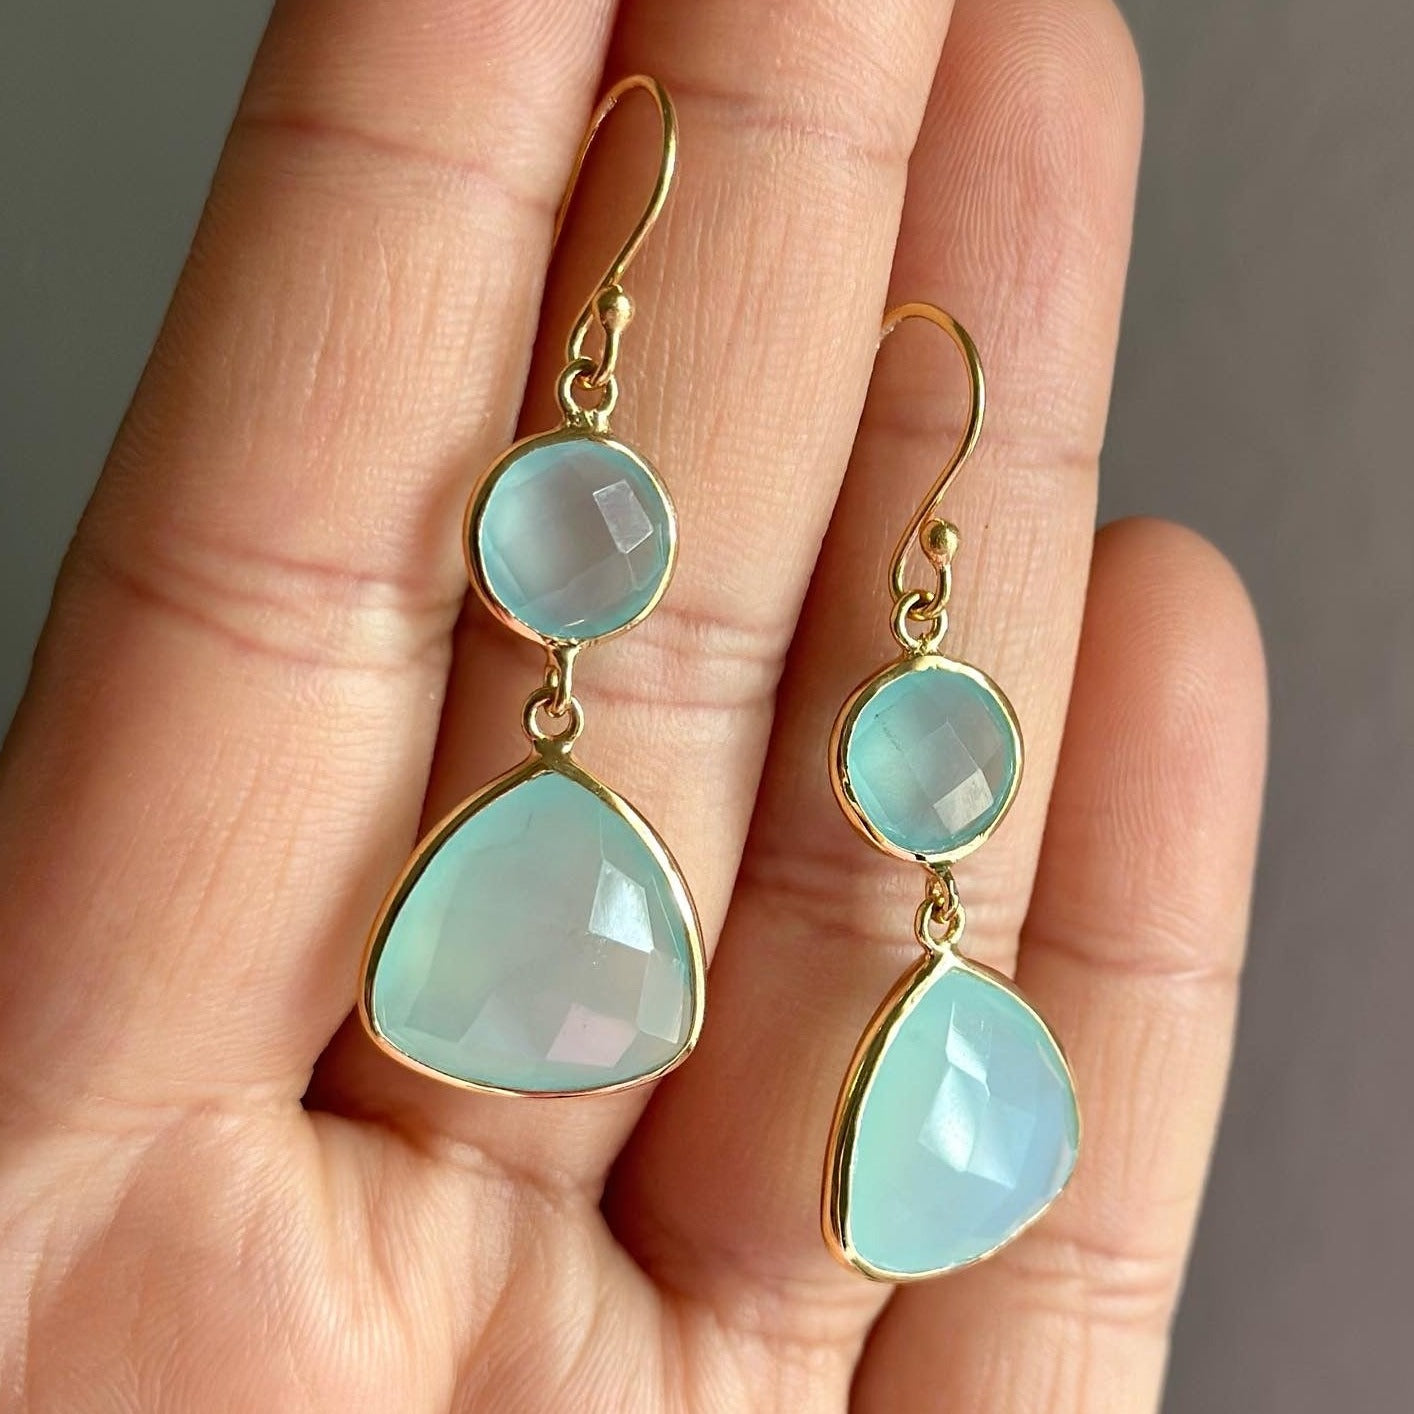 Aqua Chalcedony Gemstone Earrings in Gold Plated Sterling Silver - Triangular